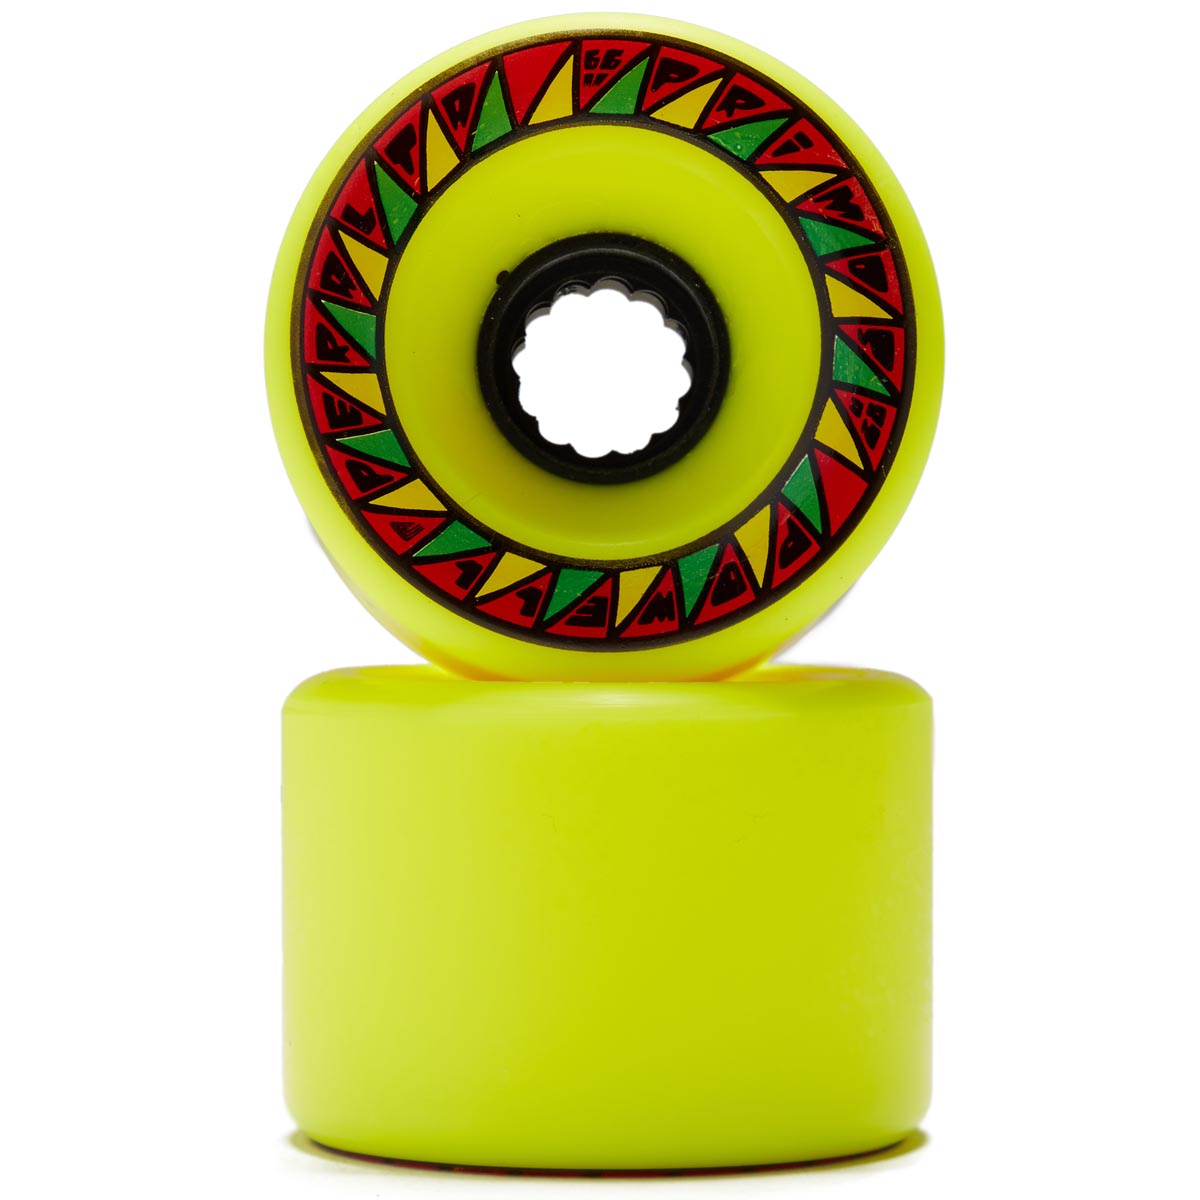 Powell-Peralta Primo 82a Longboard Wheels - Yellow - 66mm image 2